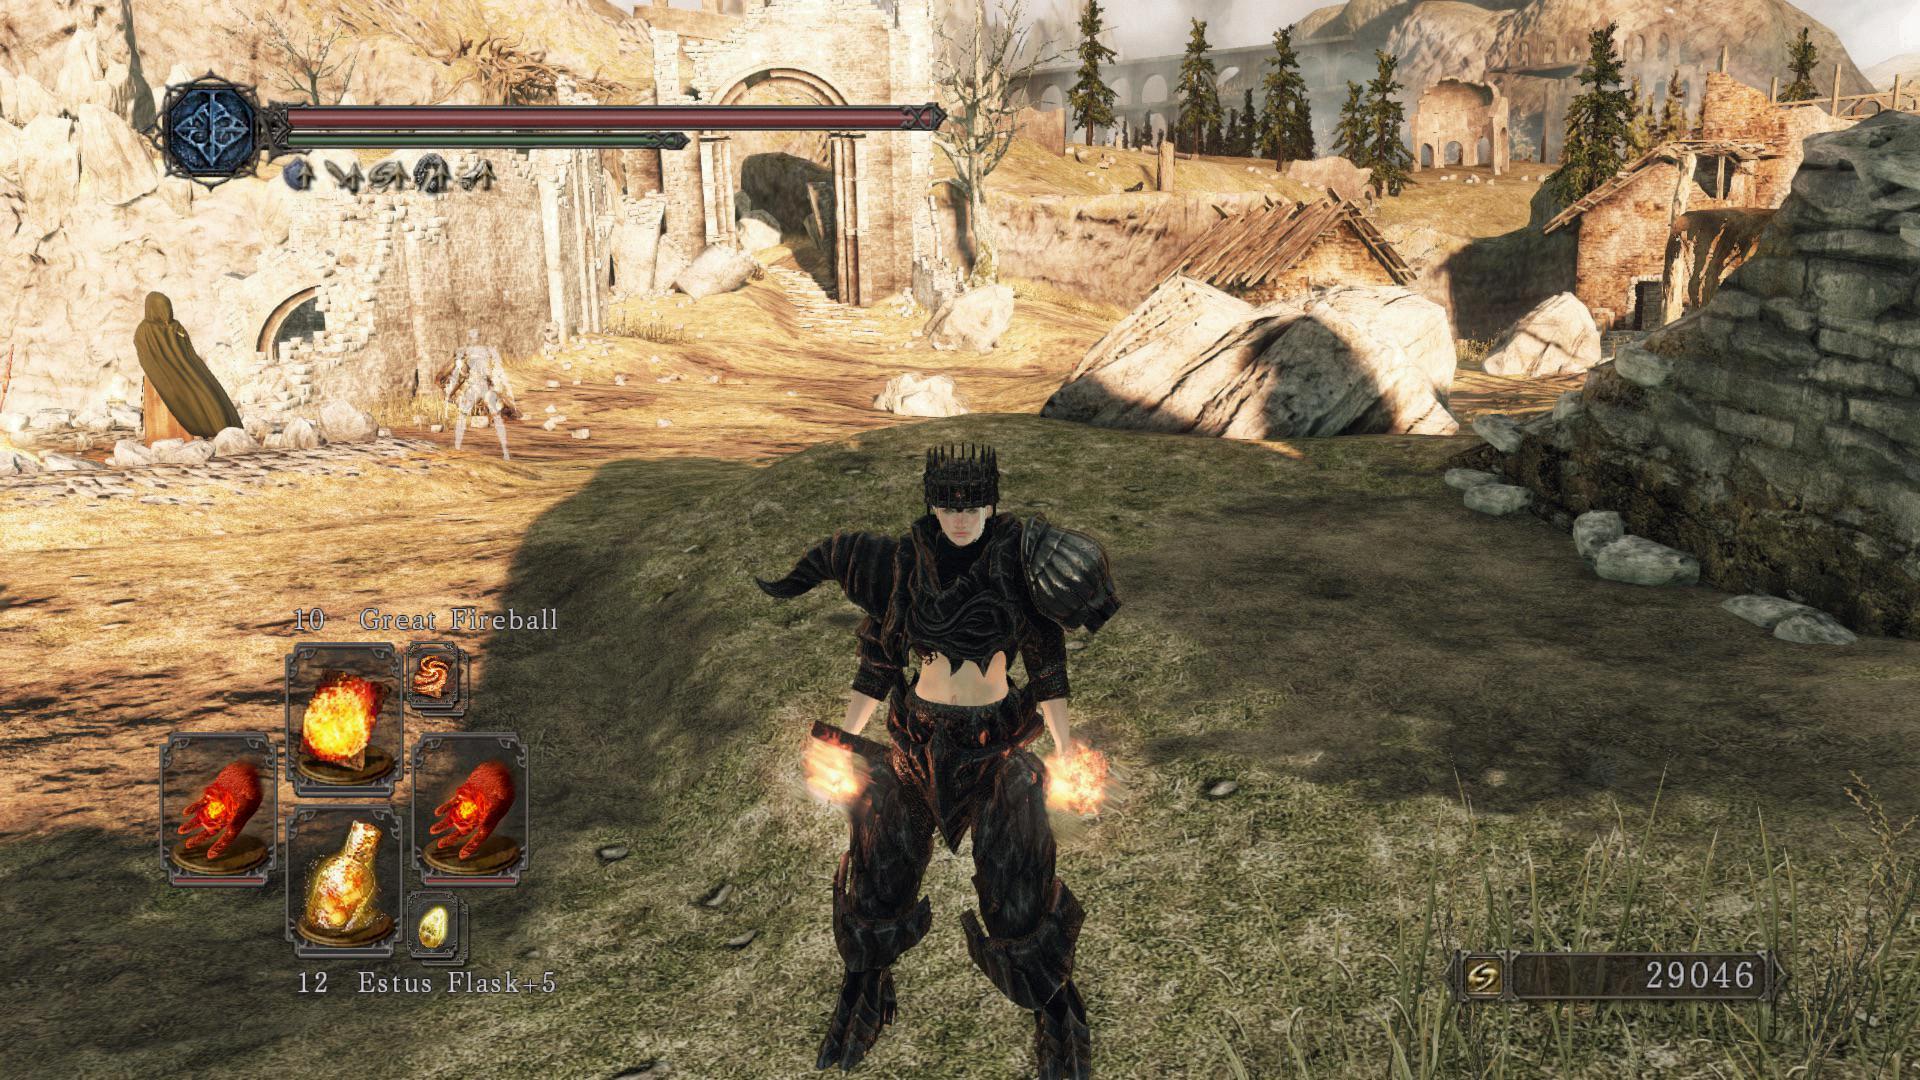 ds2 power stance